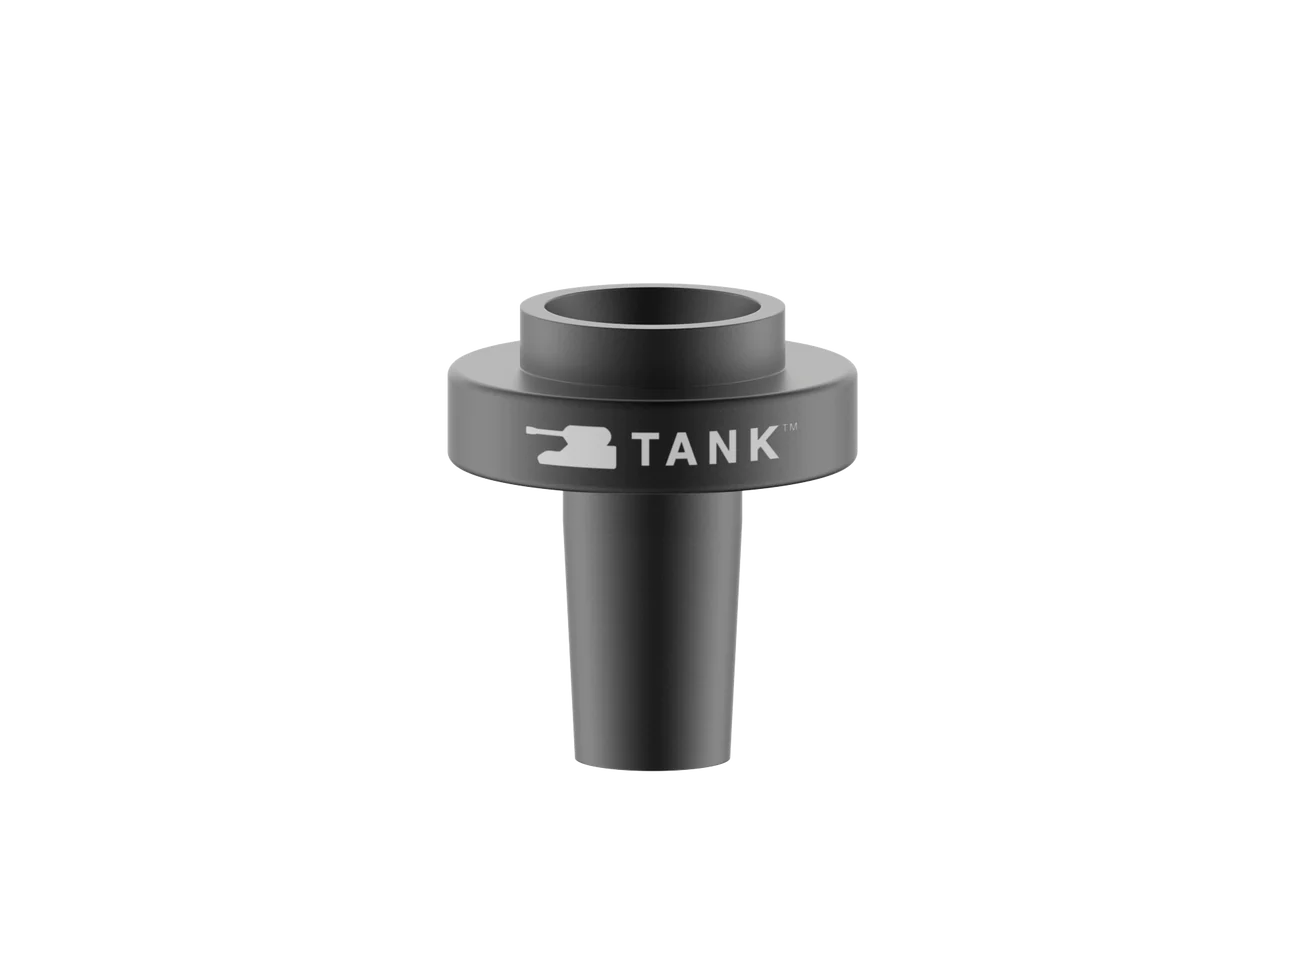 TANK GLASS | LOS ANGELES - THE TACTICAL METAL BOWL - BLACK